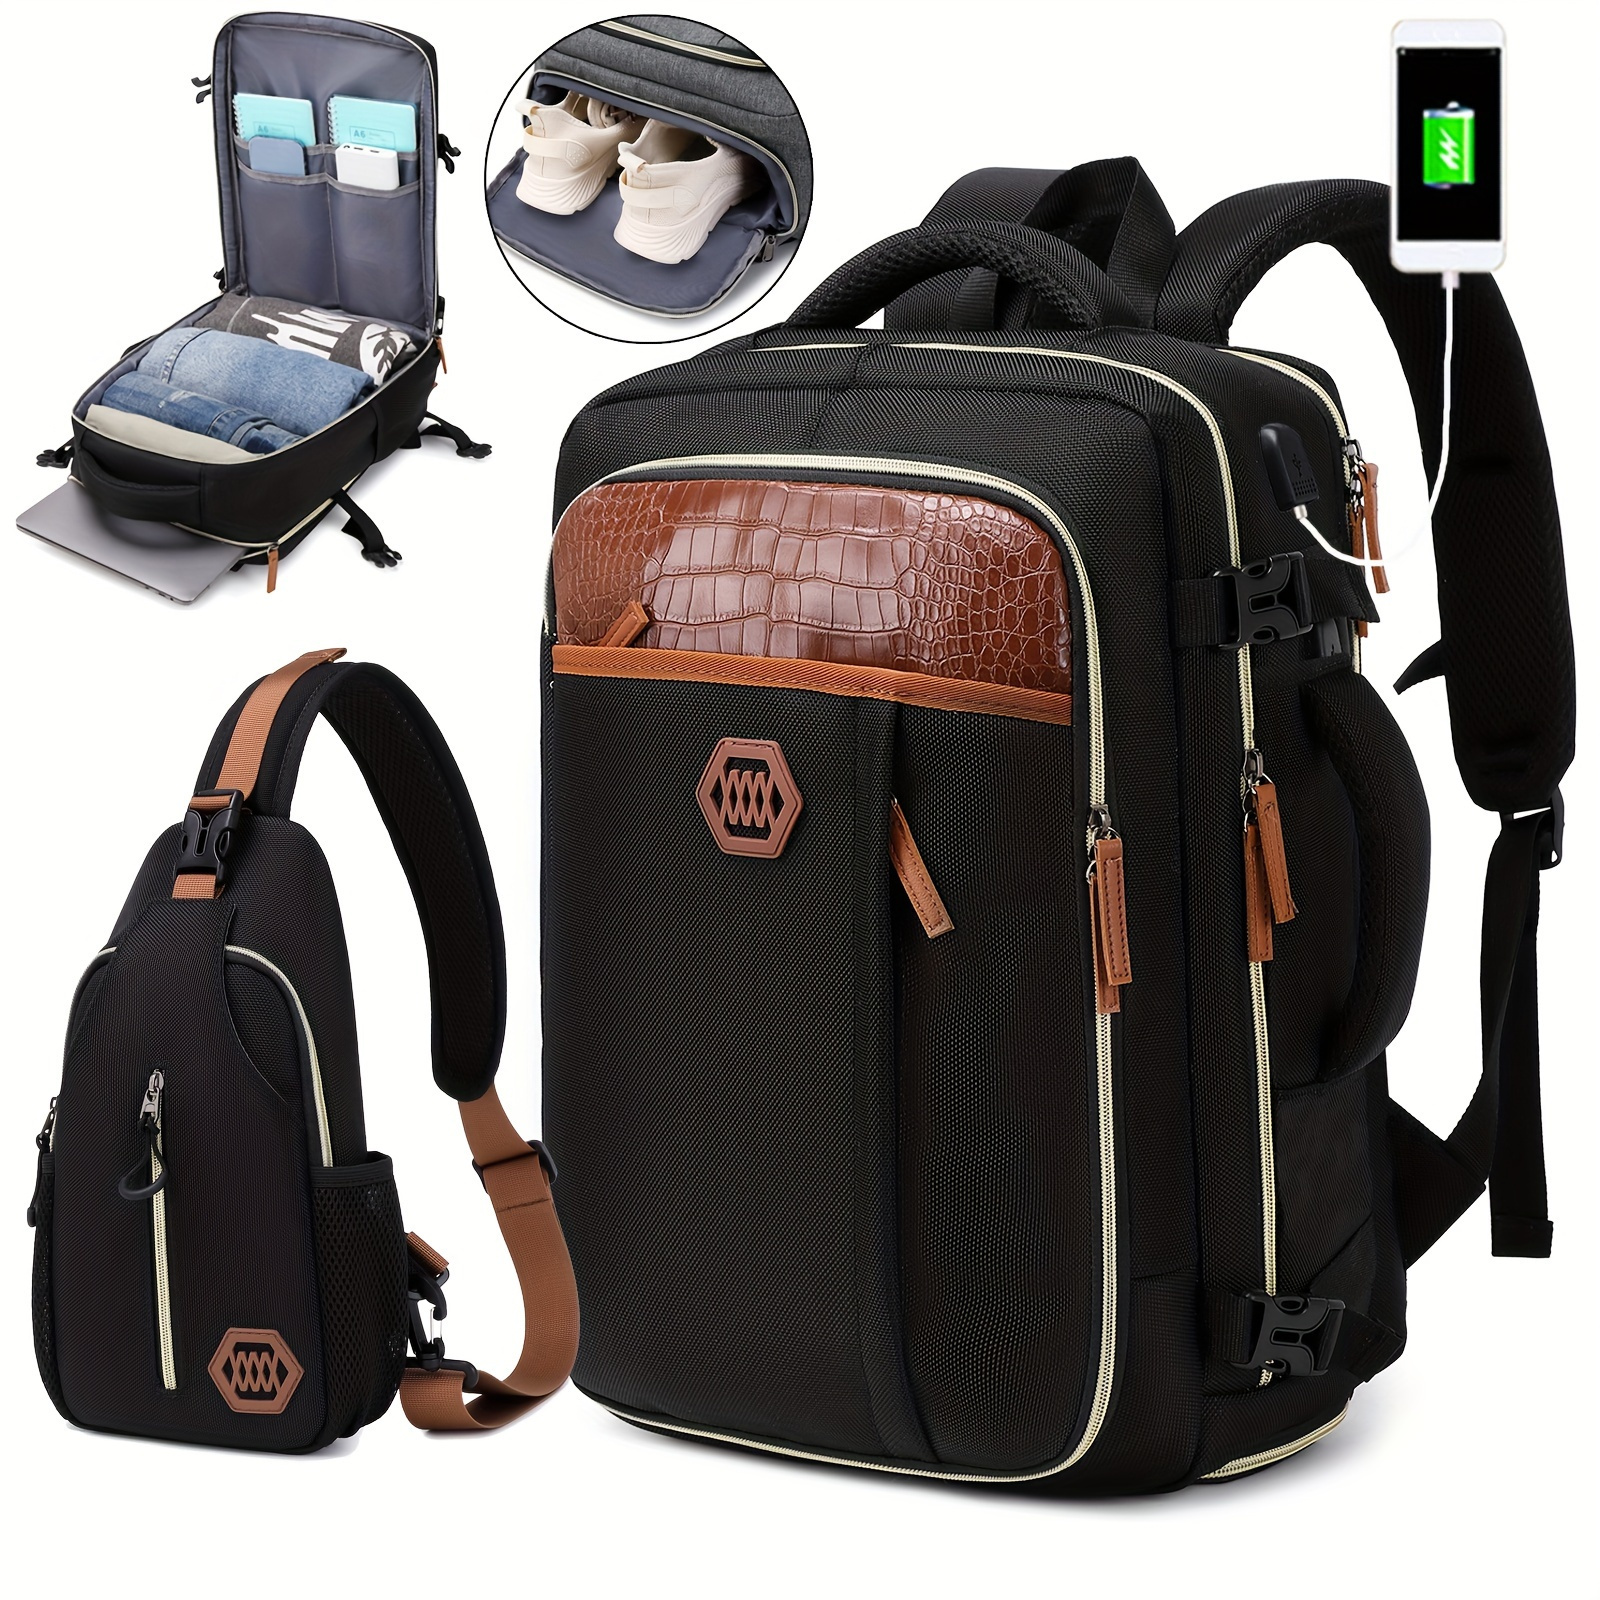 

Multi Layer Computer Backpack, Airline-approved Travel Luggage Bag, Business Work Schoolbag With Shoes Compartment Chest Bag